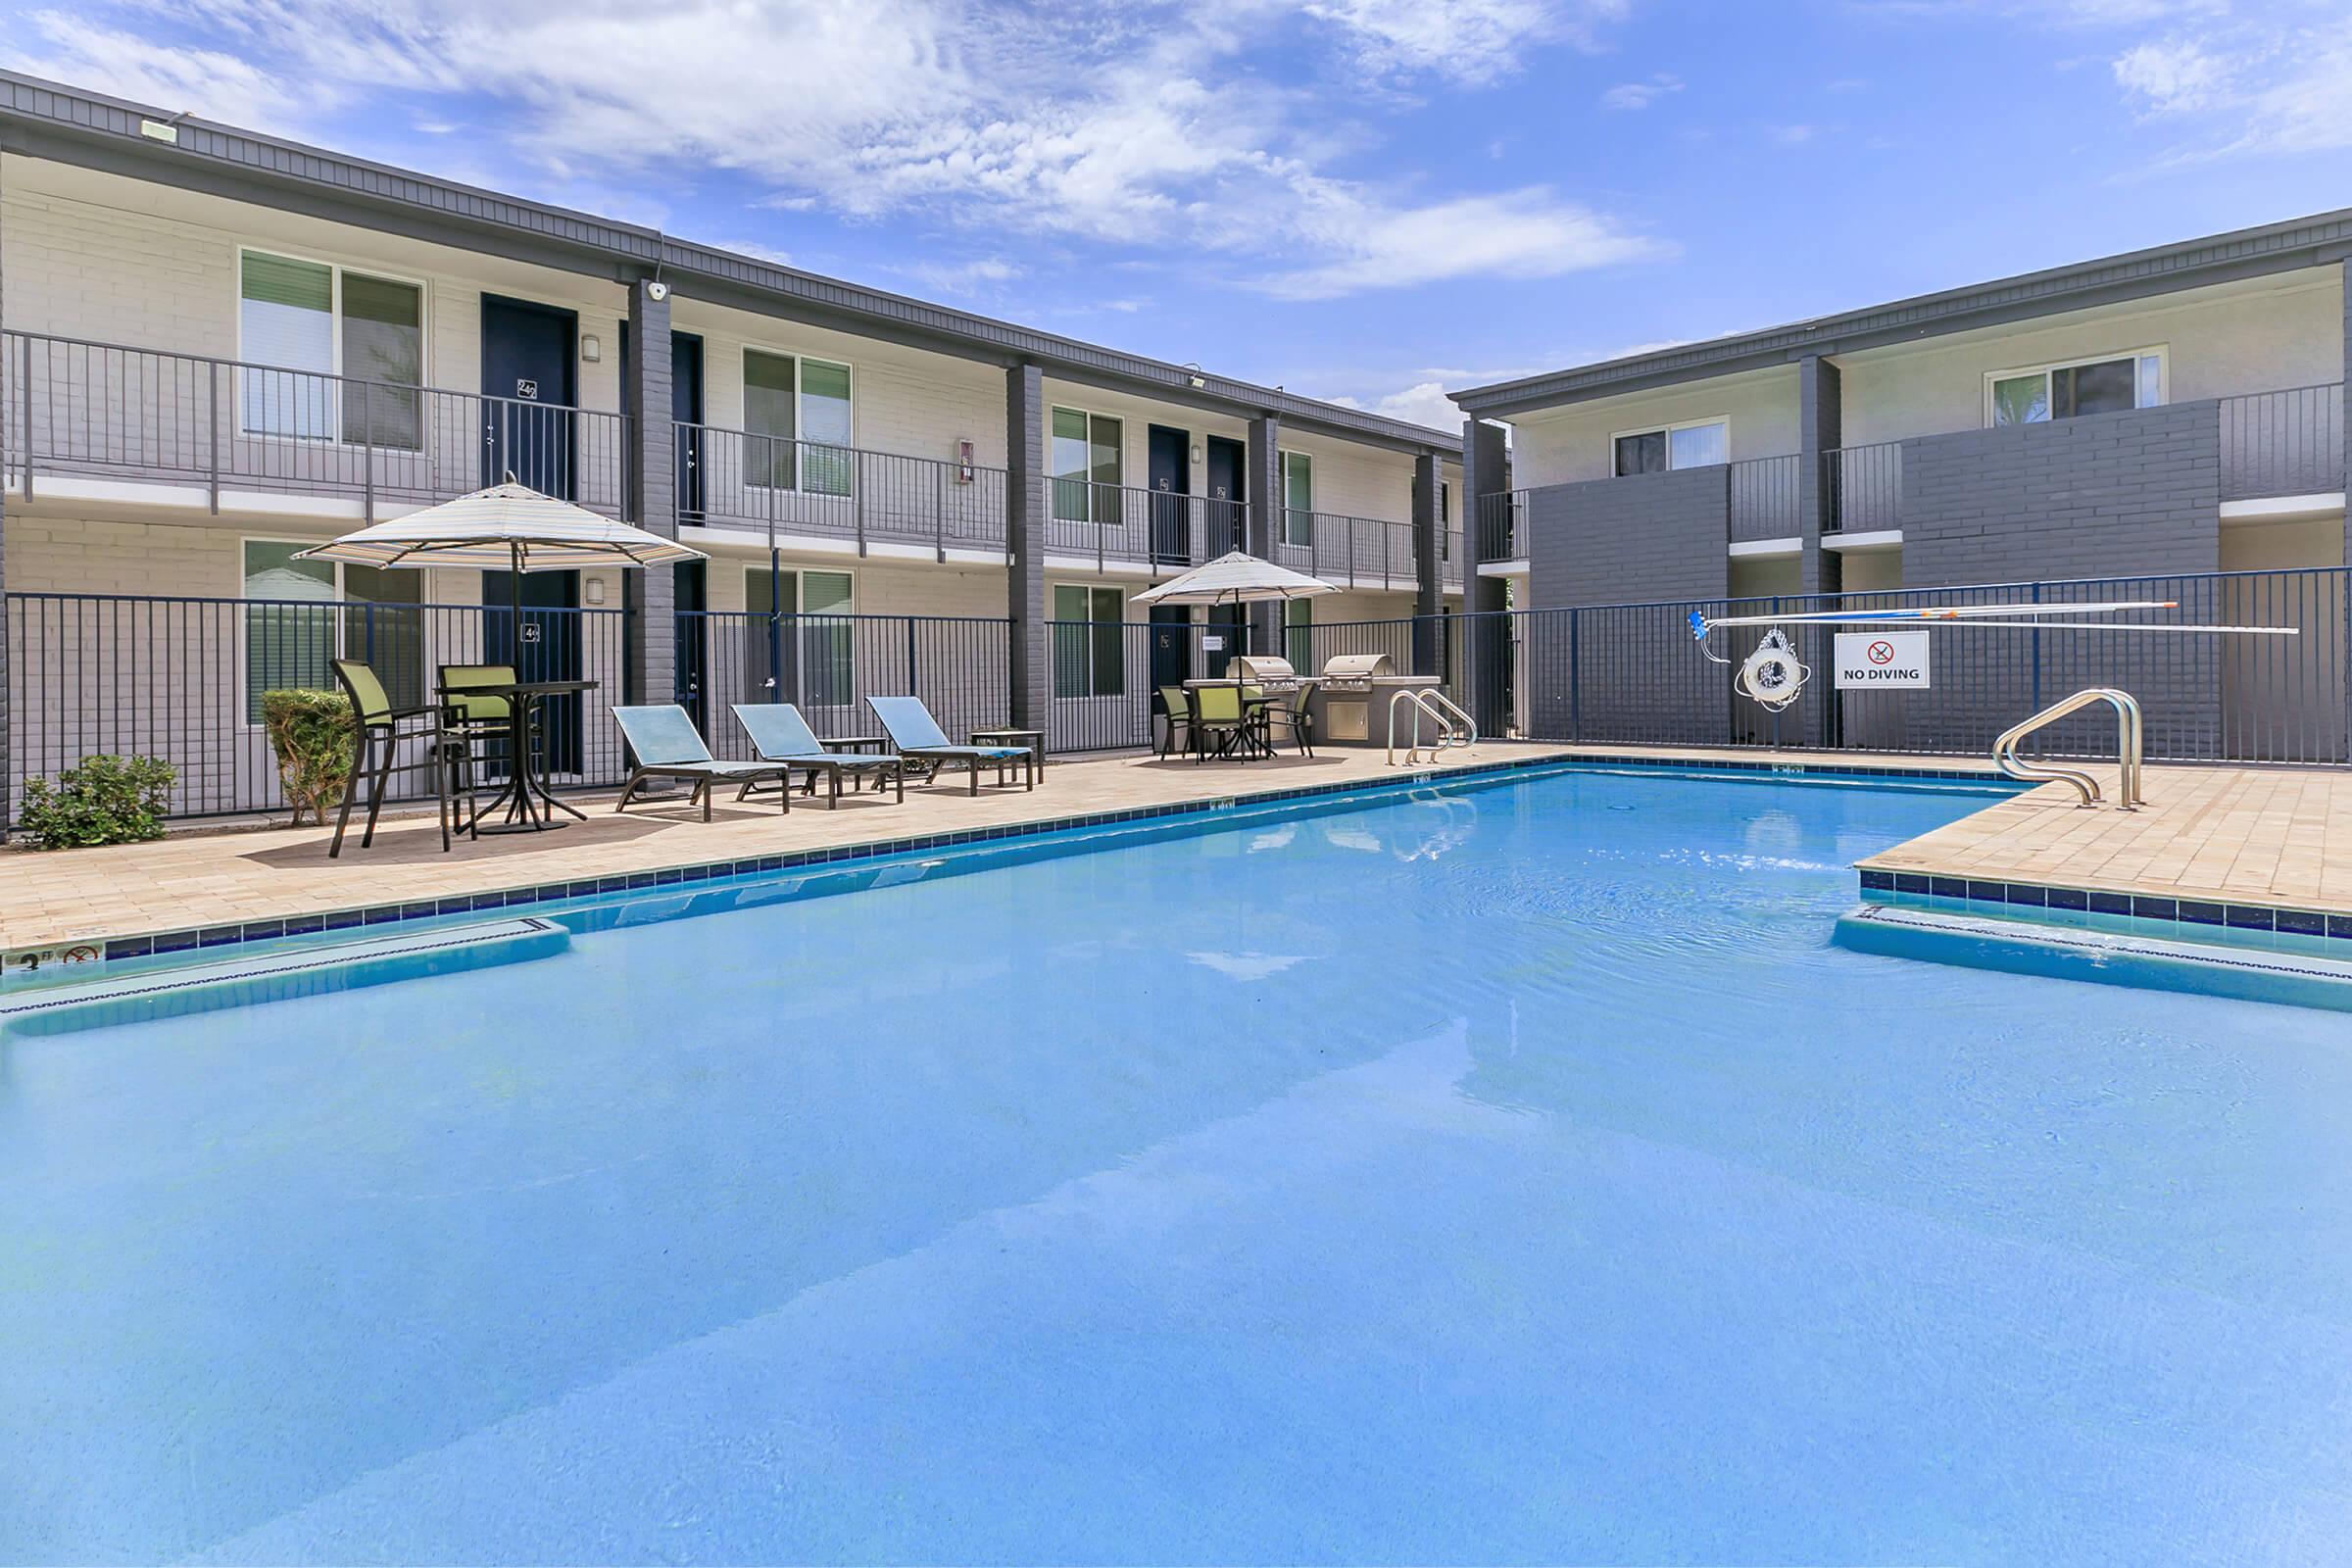 Large outdoor swimming pool surrounded by 2 story apartment buildings